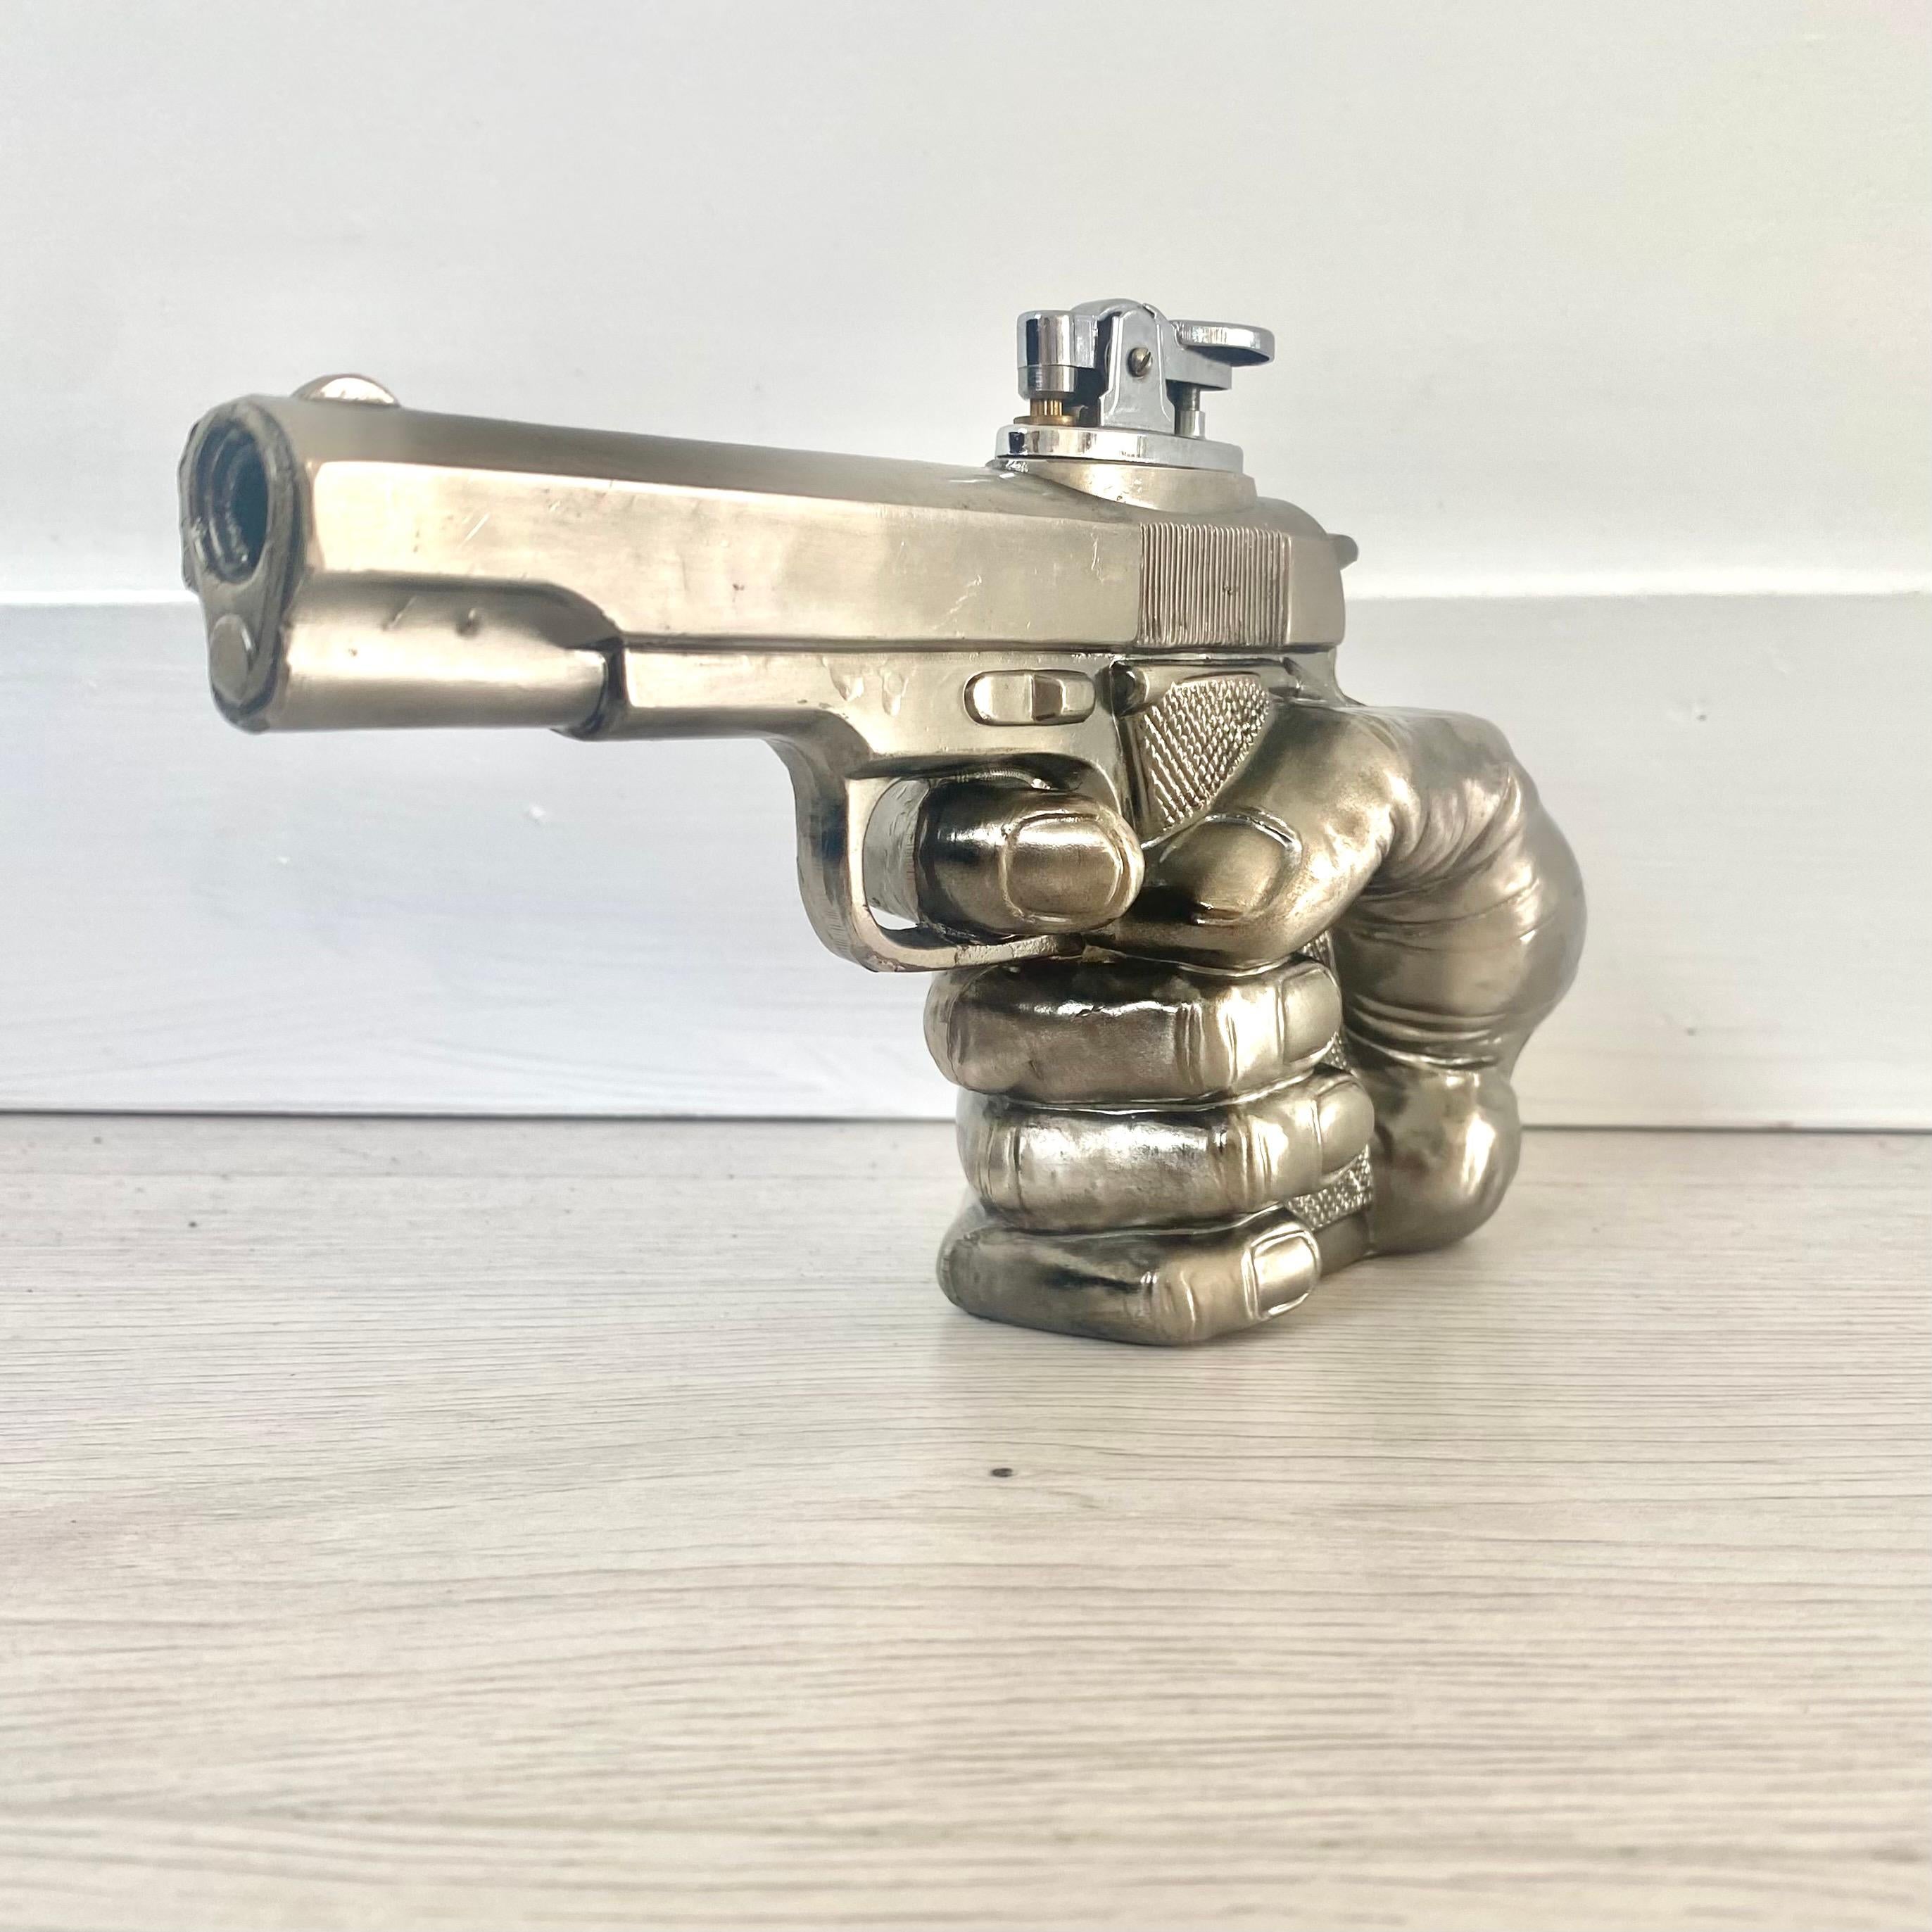 Cool vintage table lighter in the shape of a hand gripping a handgun. Made in Japan. Made of metal and stands up on its own.  Light patina give this piece a great vintage look while still preserving the 80's futuristic chrome finish. Cool tobacco